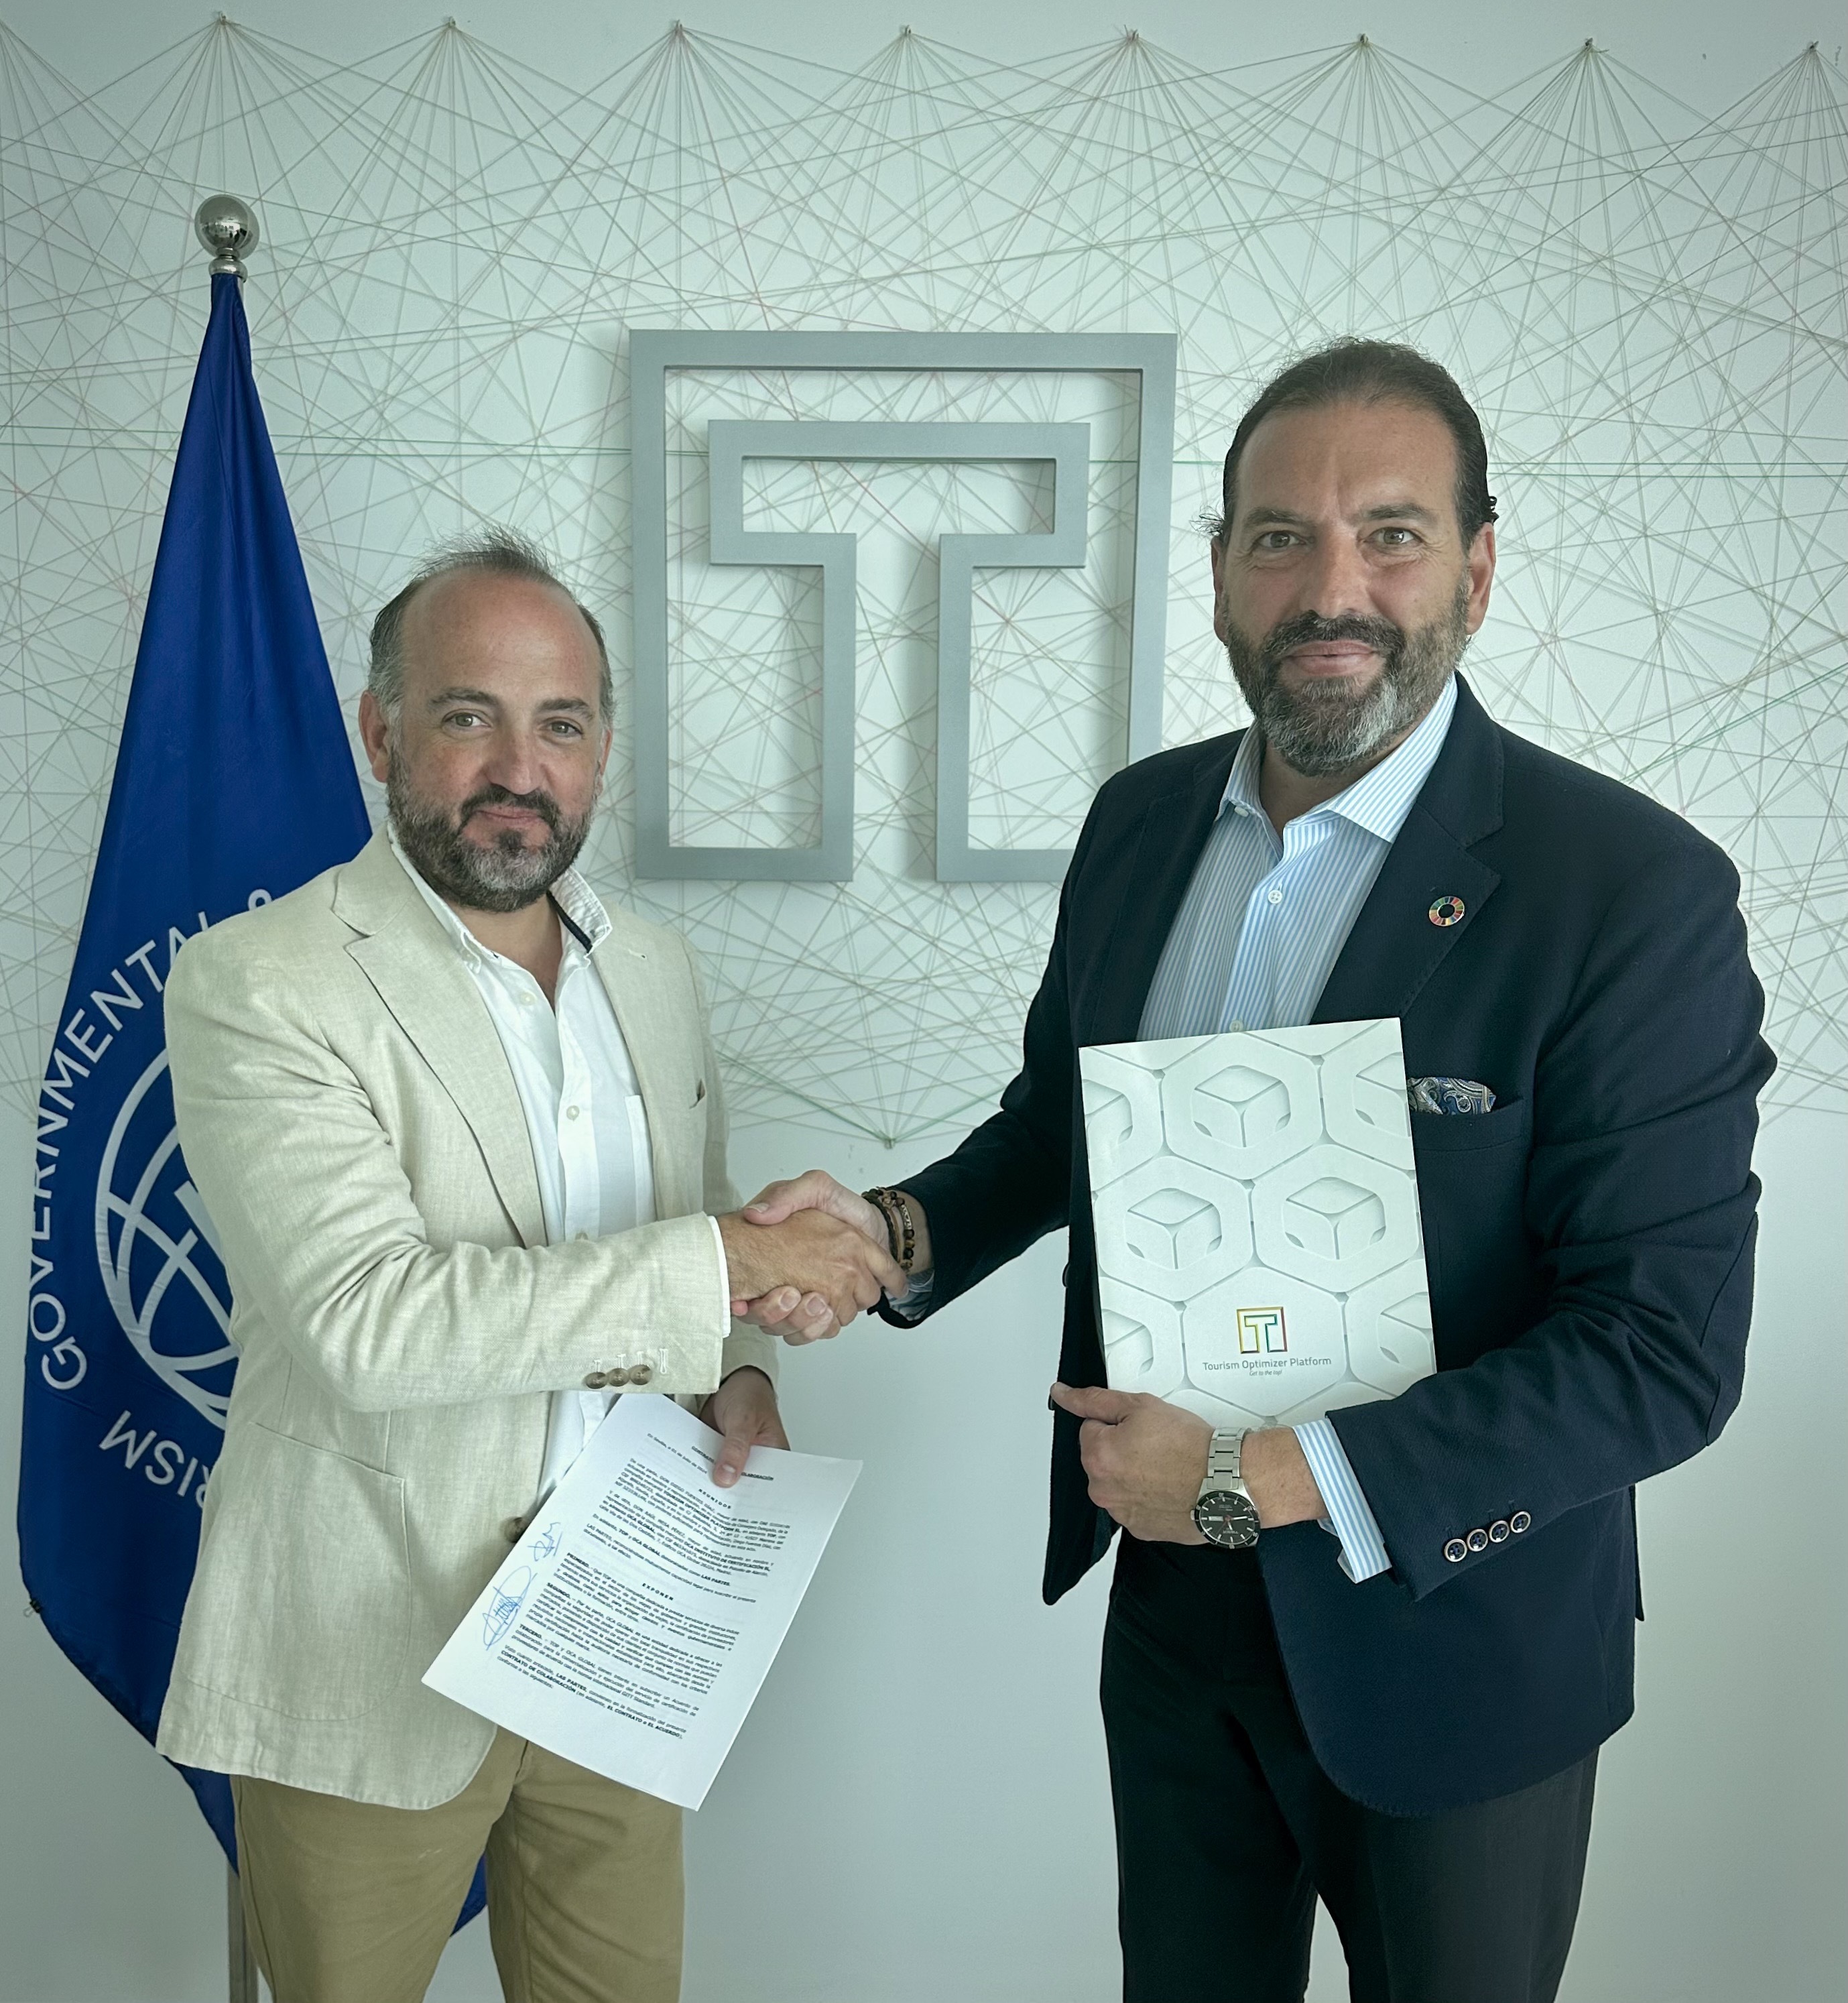 Agreement between OCA Global and Tourism Optimizer Platform for the Commercialization and Certification of Government and Institutional Service Providers Worldwide